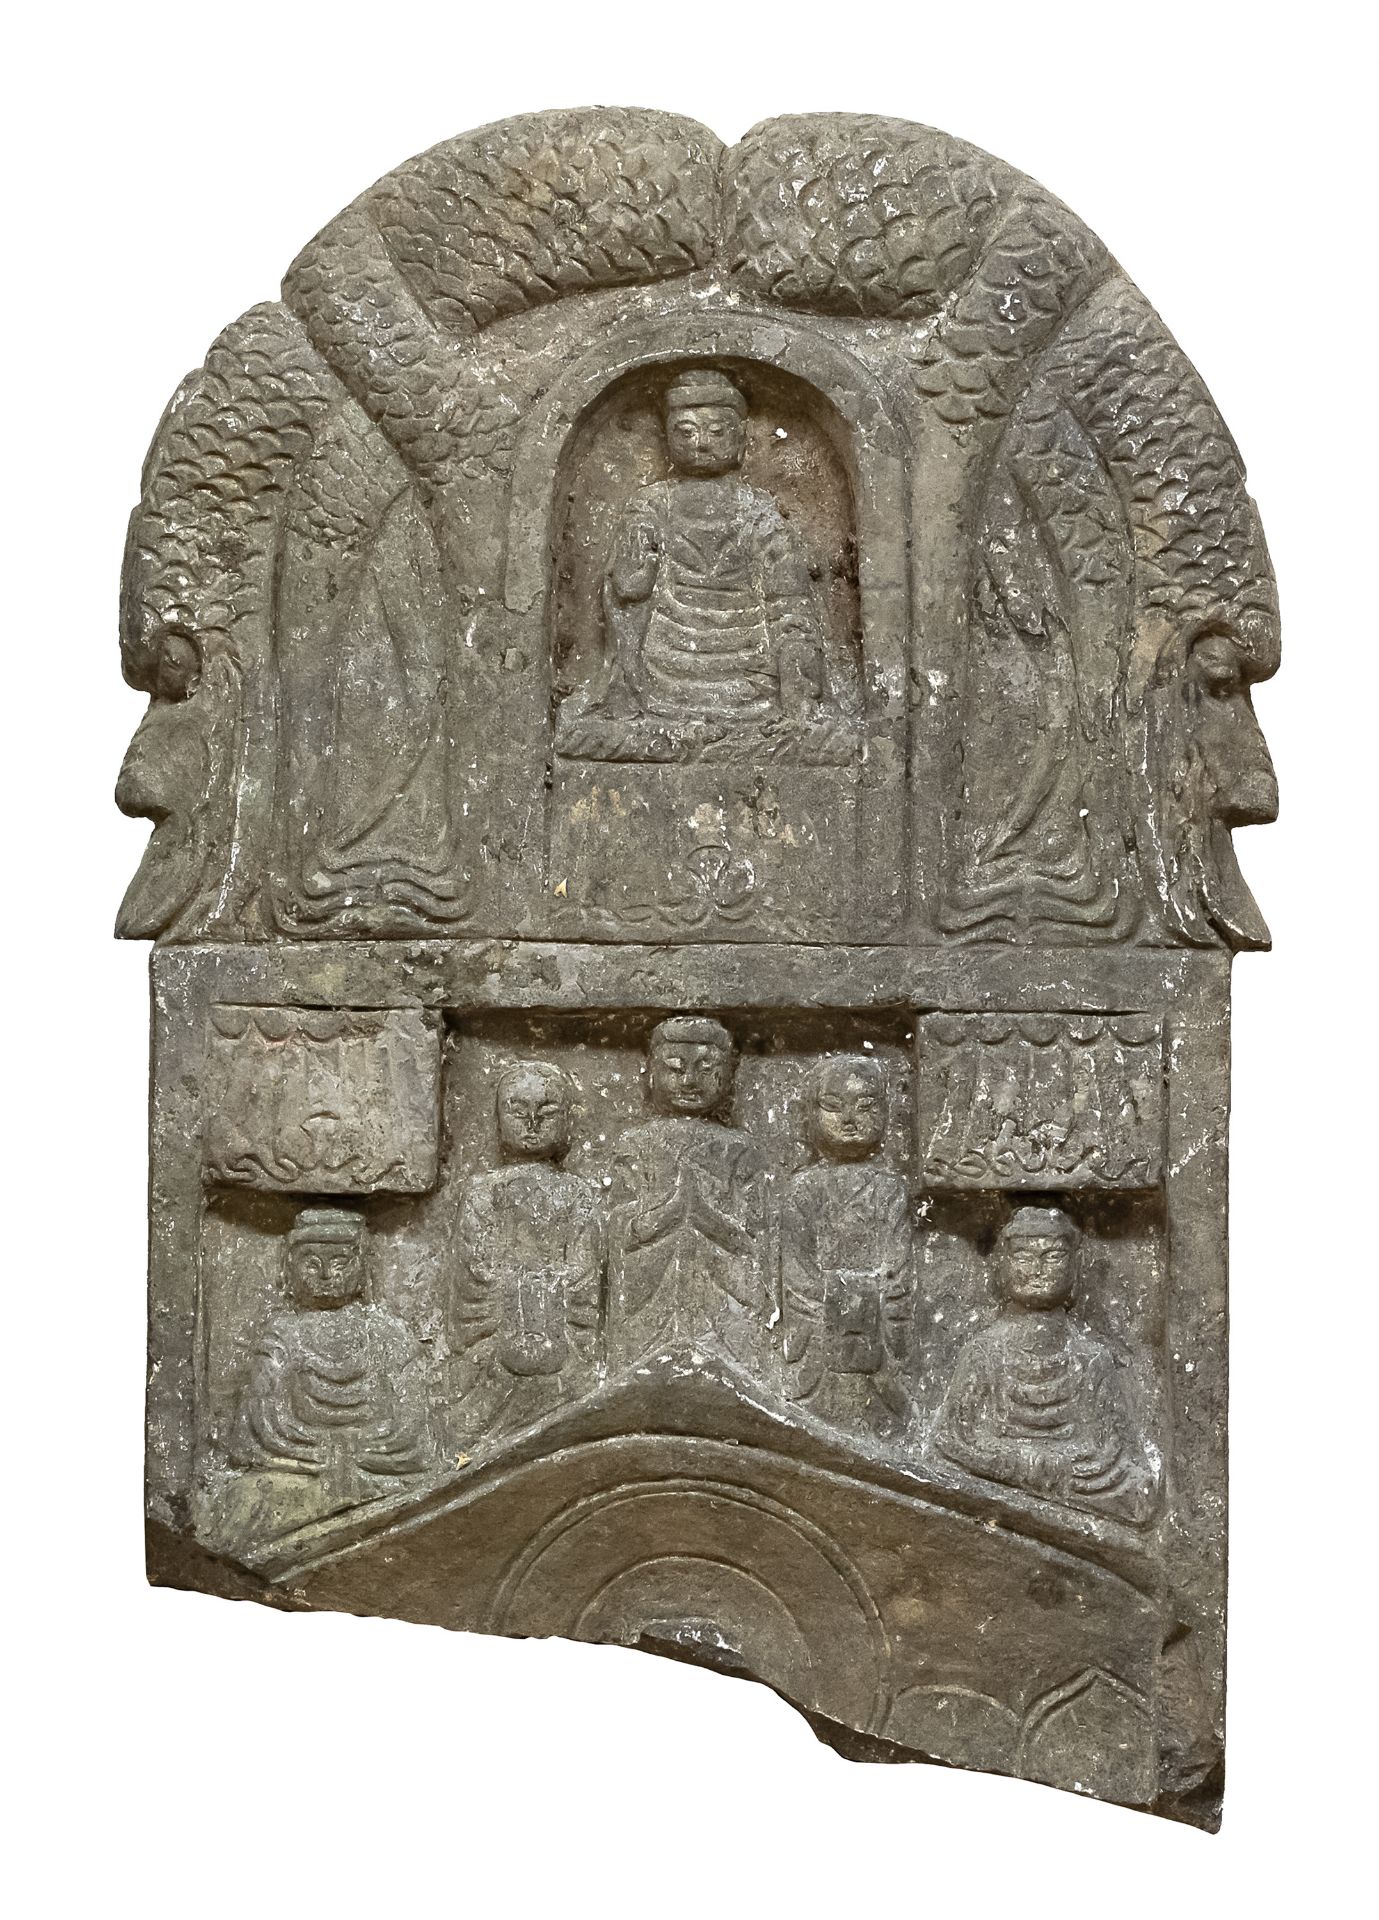 A CHINESE STONE STELE 17TH CENTURY. MISSING PART.